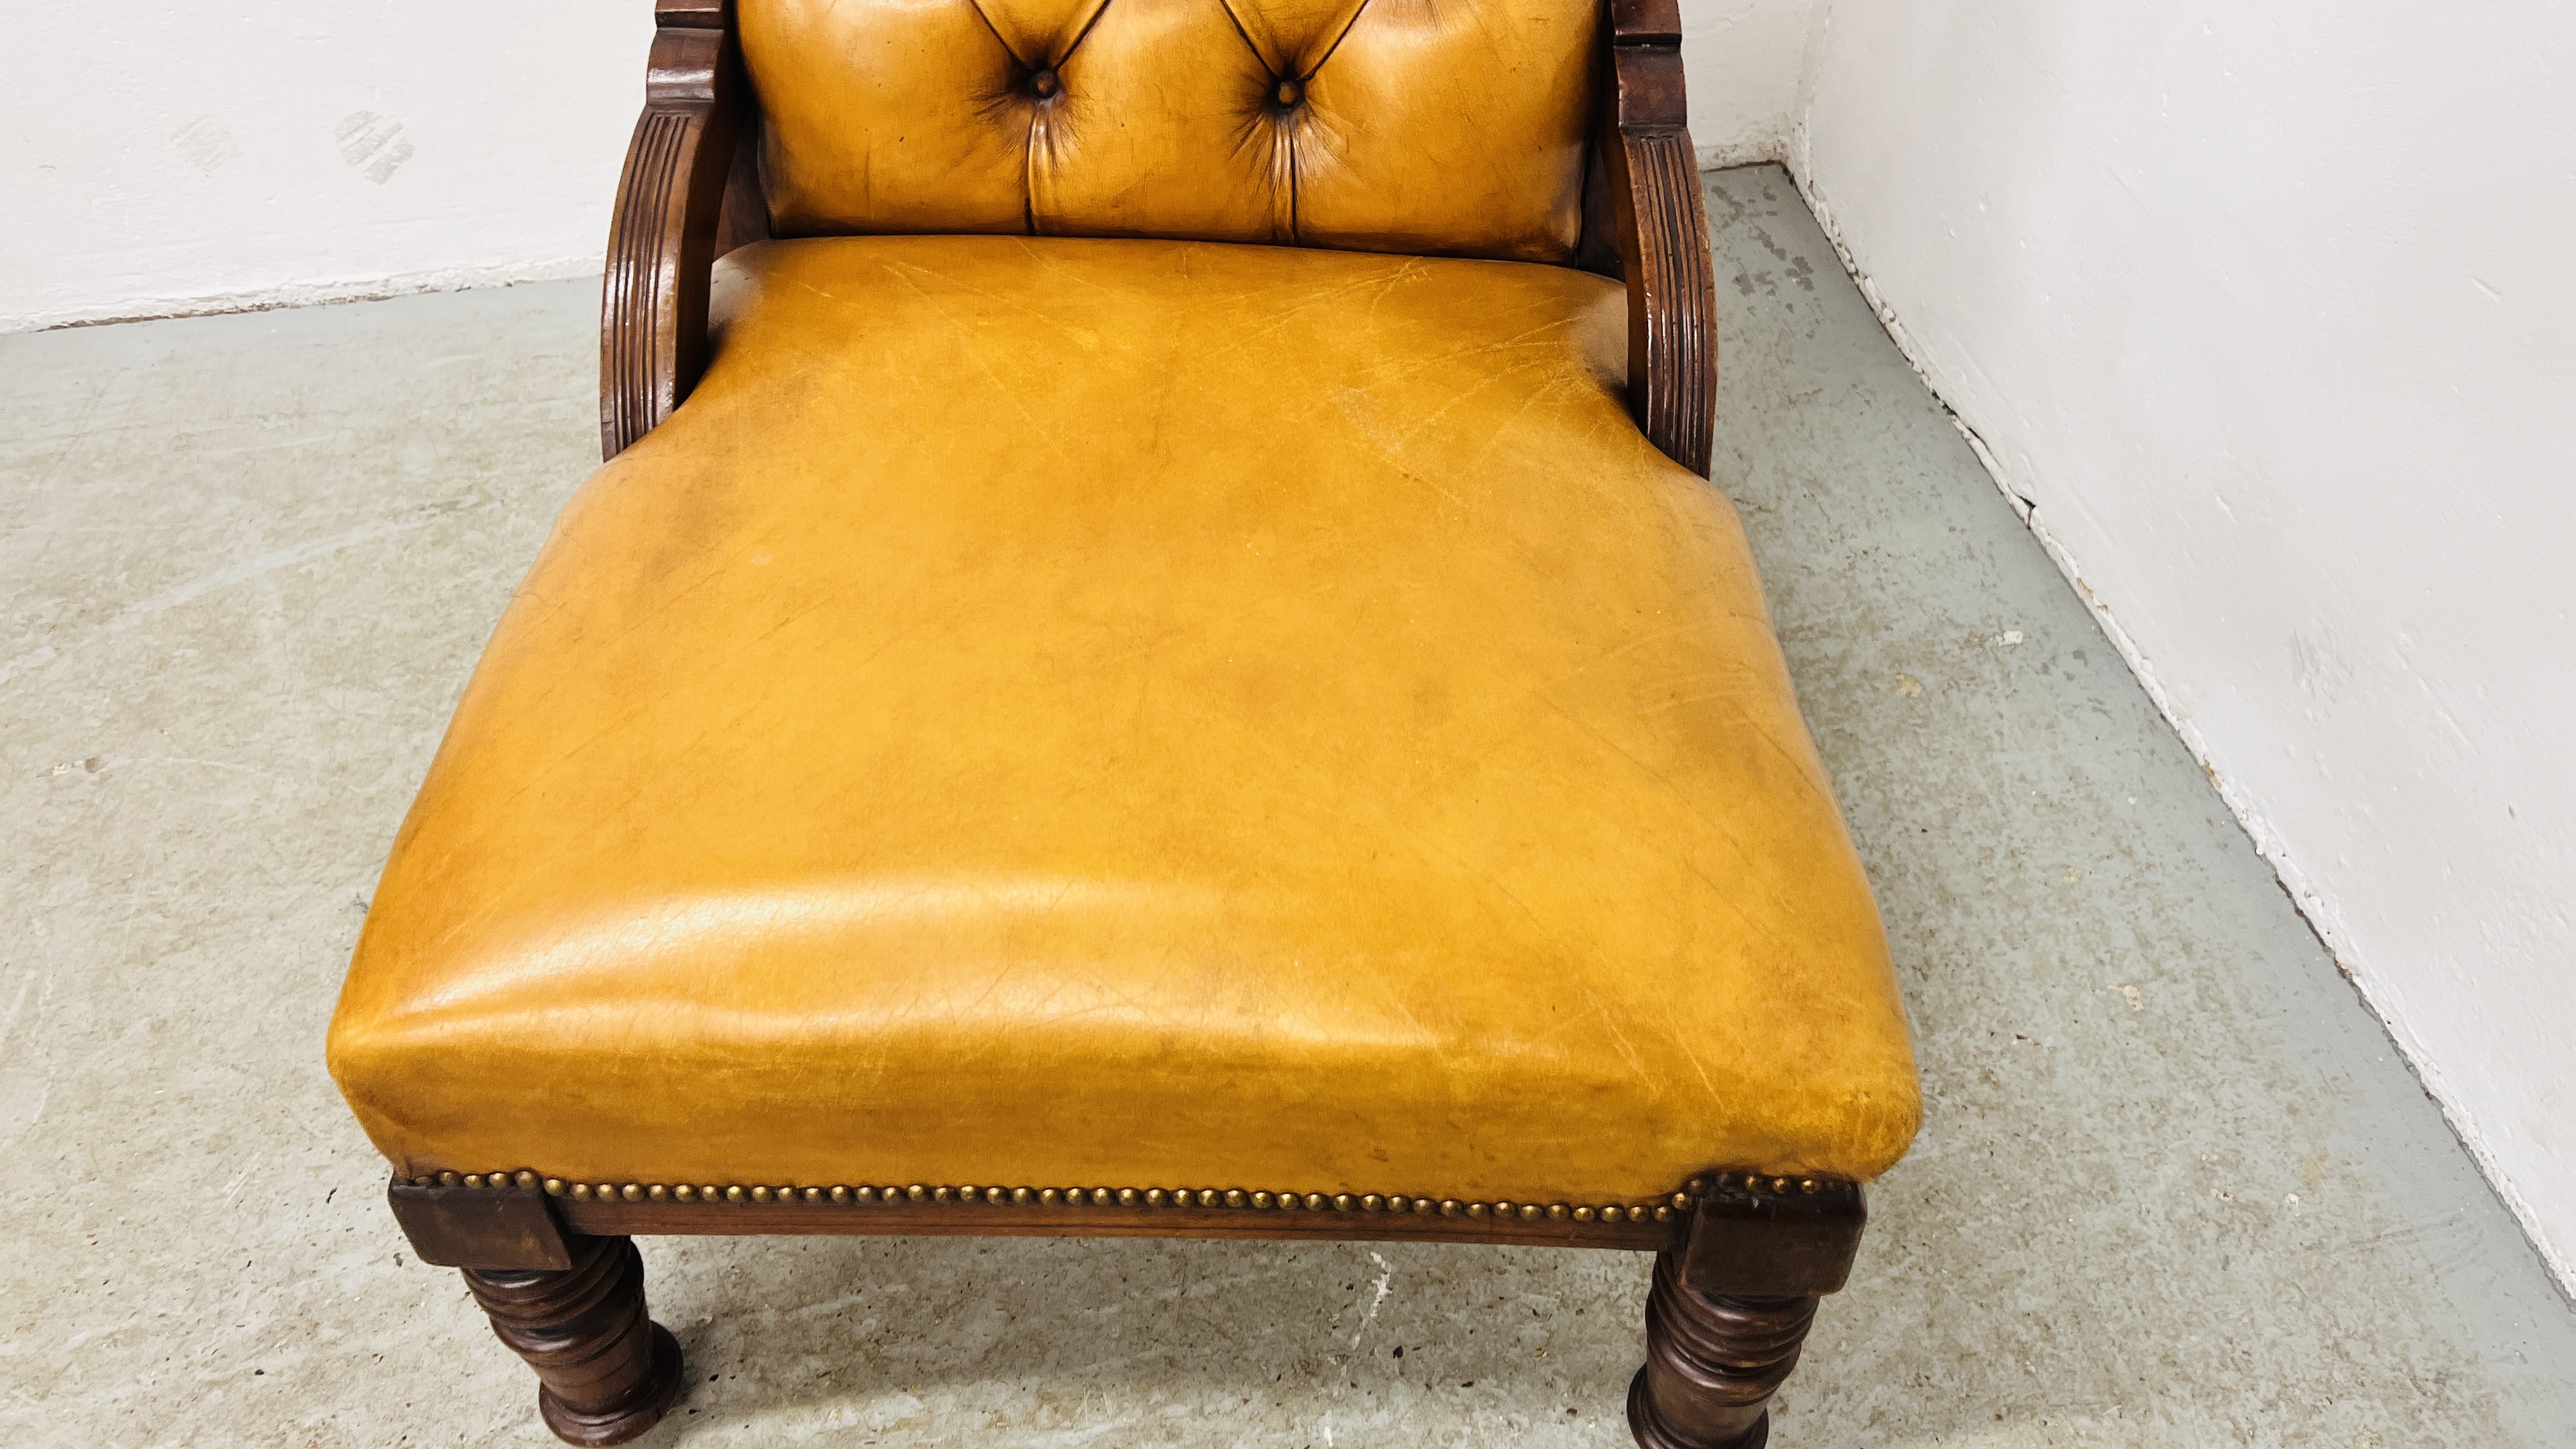 ANTIQUE EDWARDIAN MAHOGANY LOW CHAIR UPHOLSTERED IN TAN LEATHER - BUTTON BACK. - Image 5 of 12